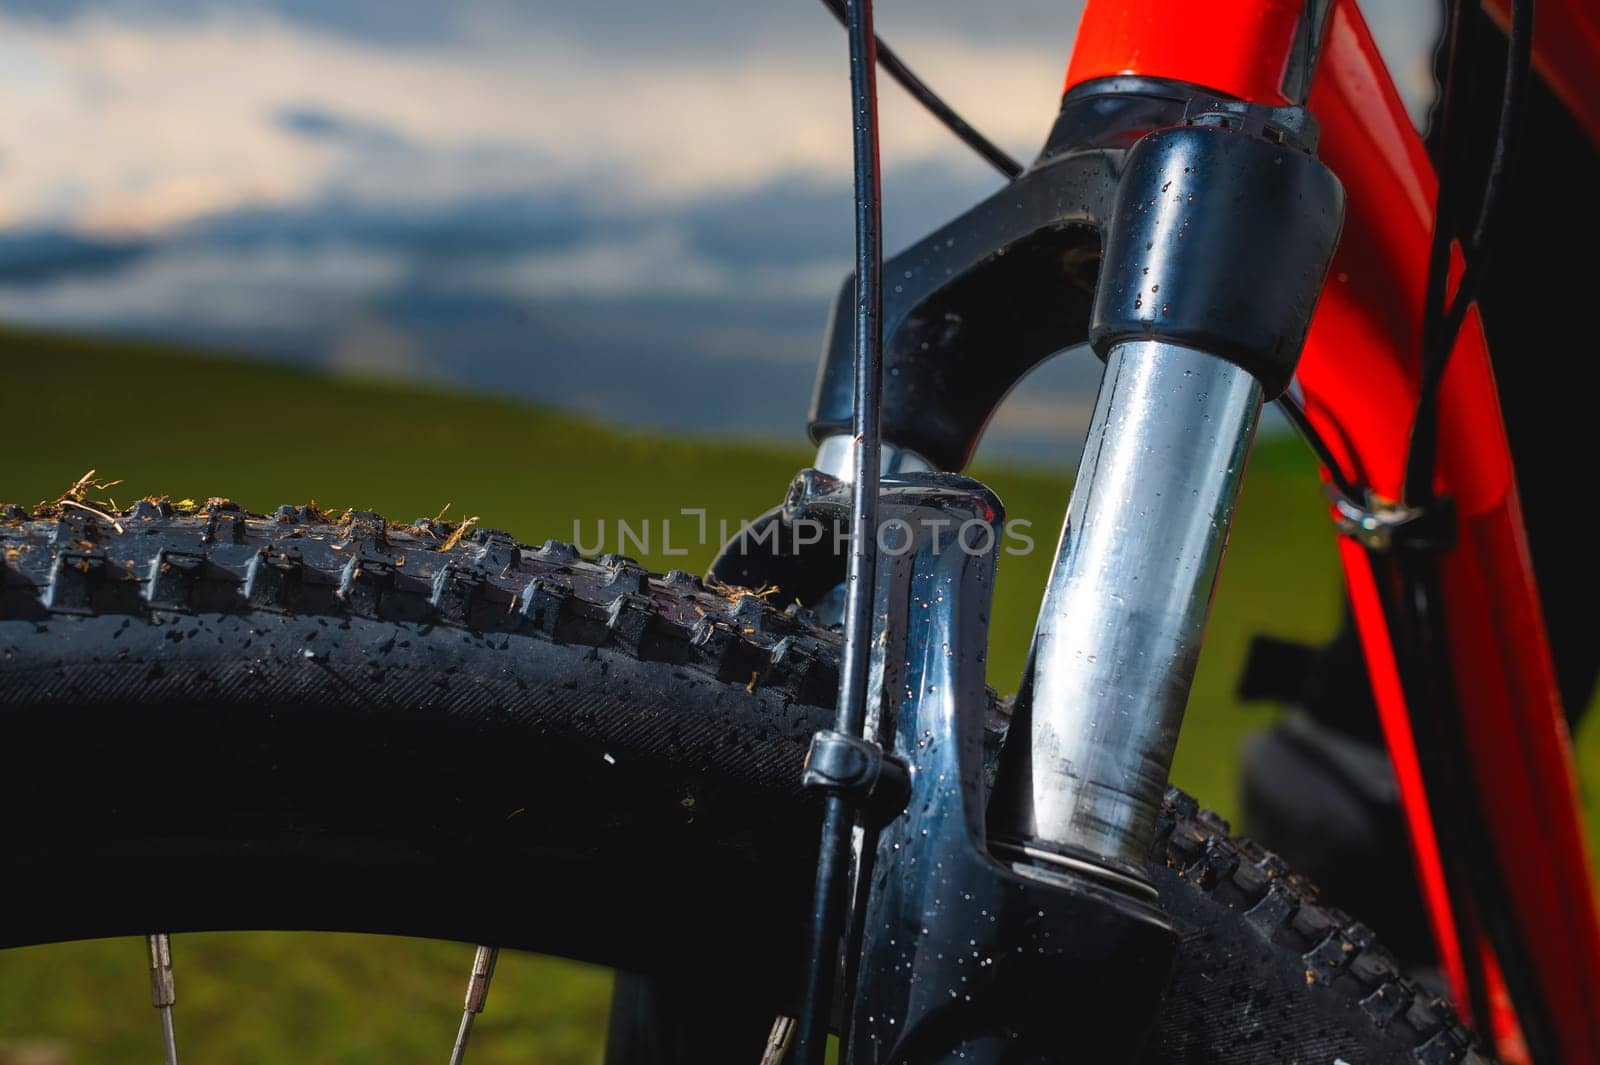 high-speed bicycle disc brake system, perforated disc and caliper, mtb, close-up, mountain bike brake efficiency by yanik88